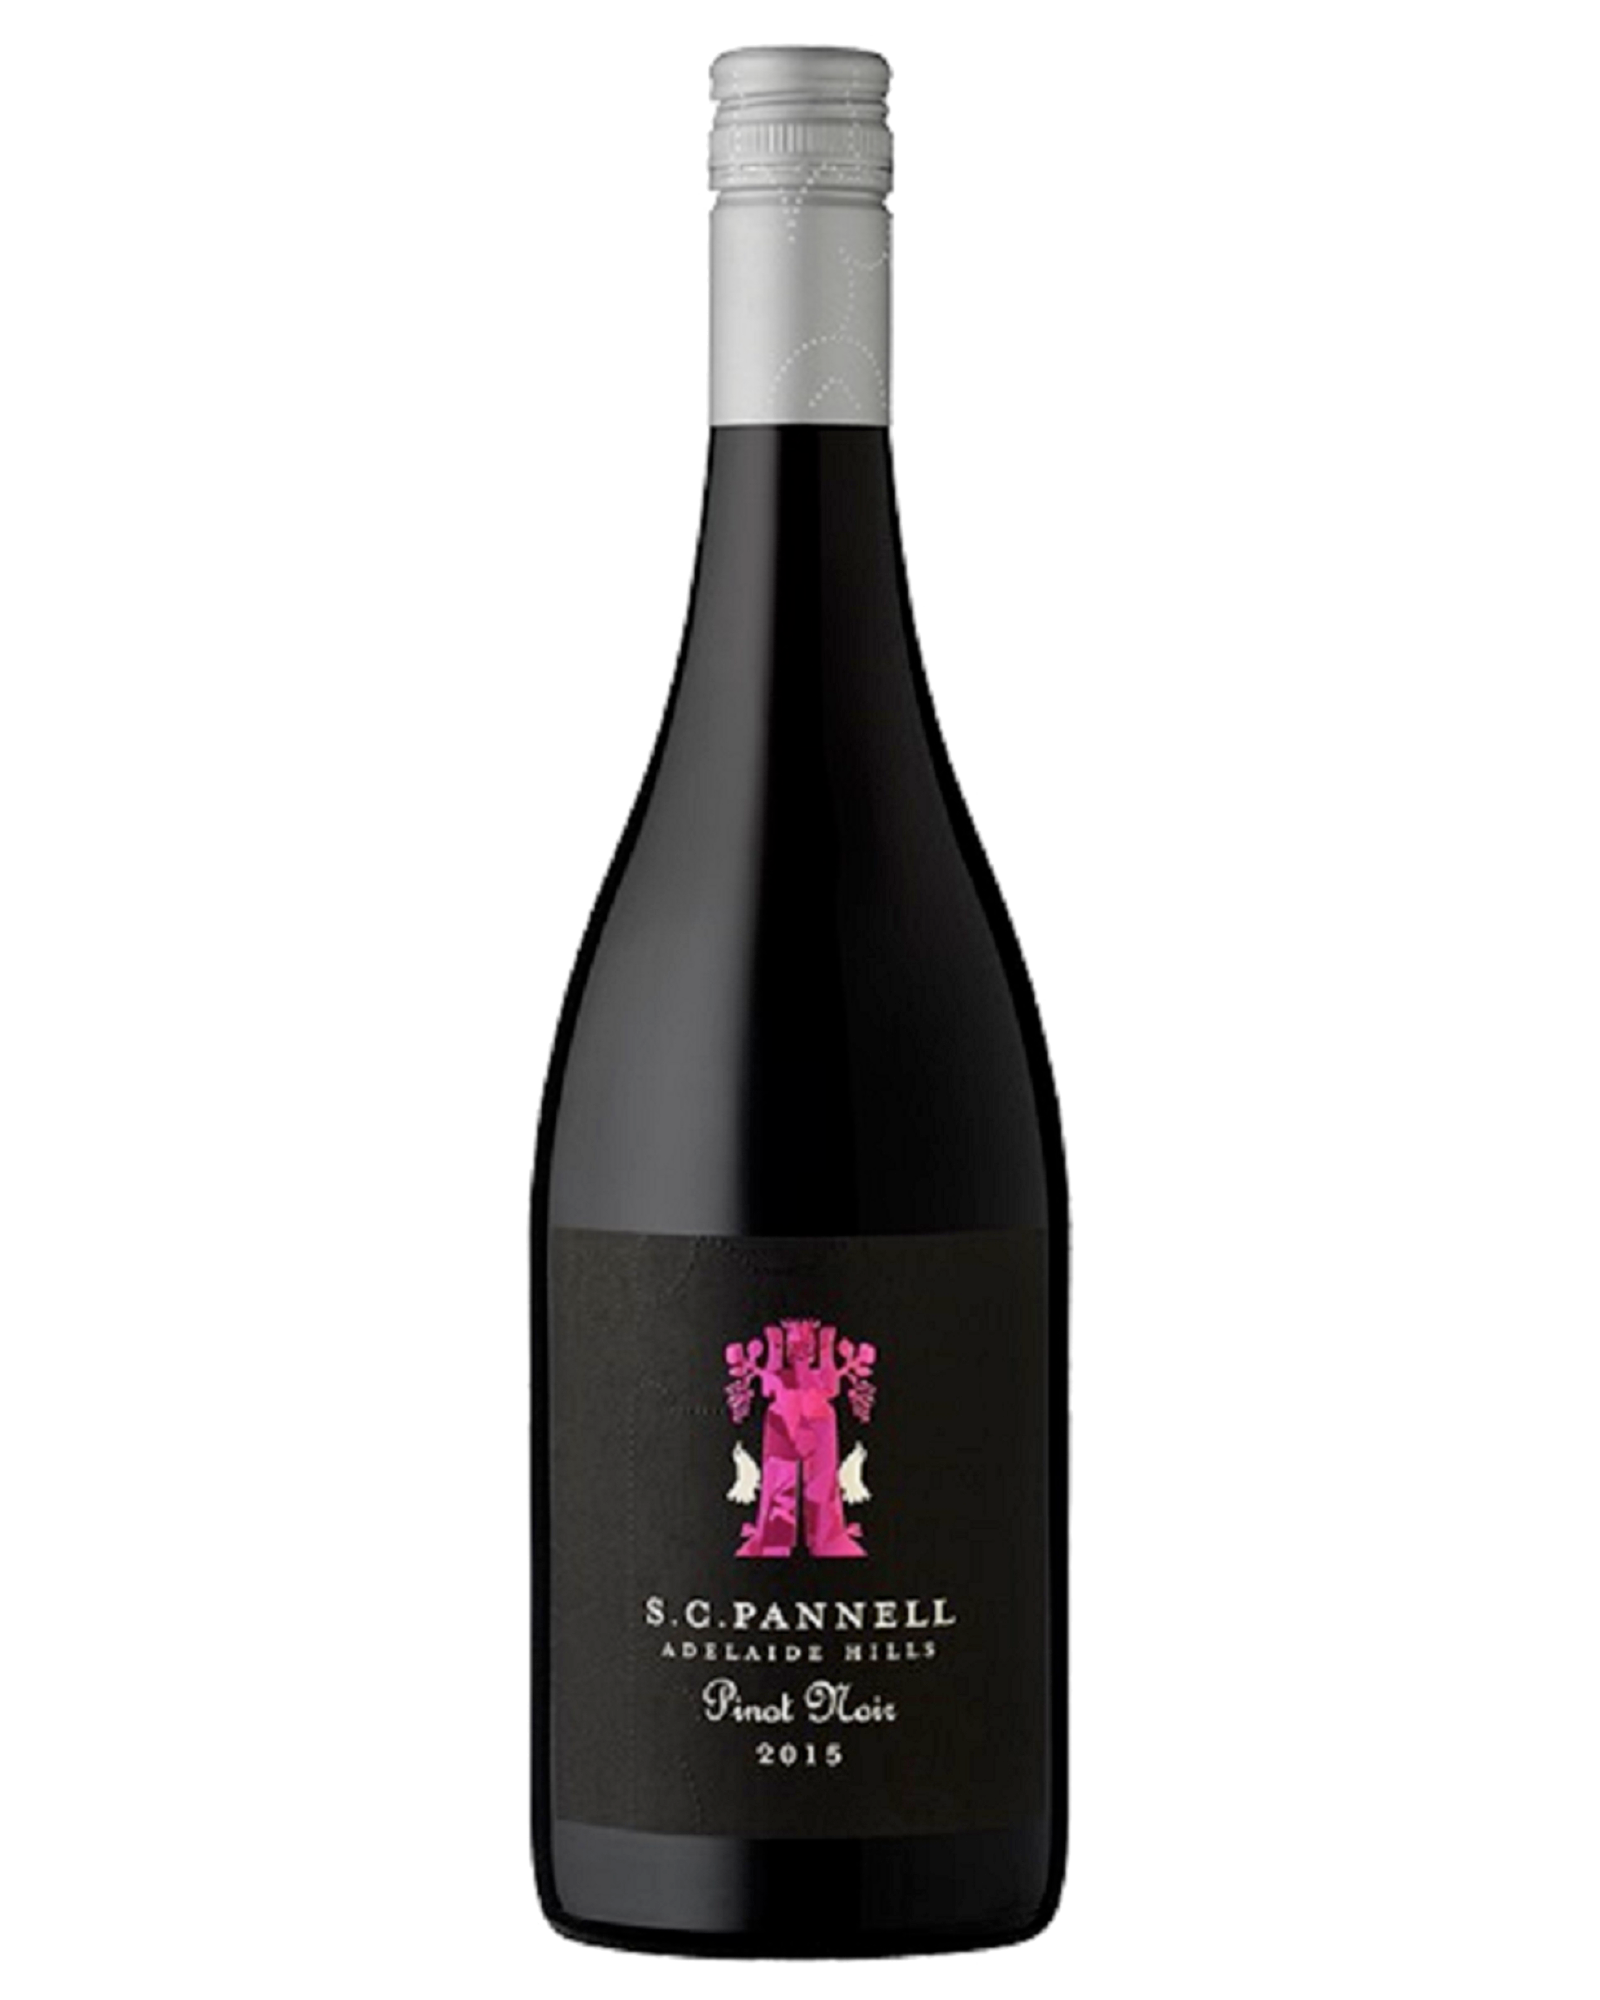 S.C. Pannell Adelaide Hills Pinot Noir 2015